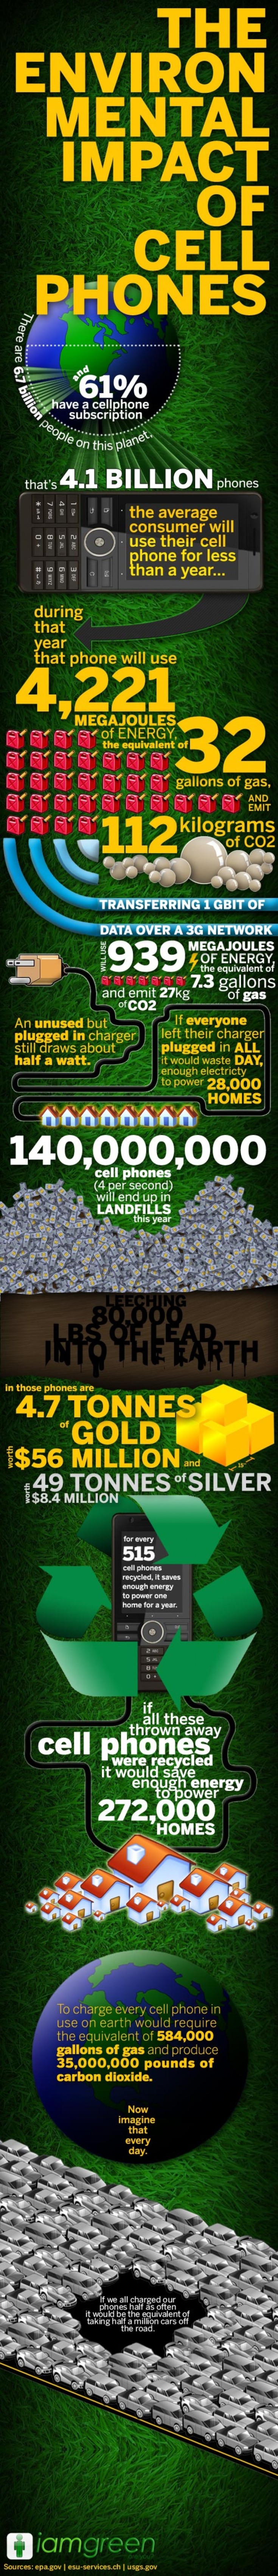 The environmental impact of cell phones